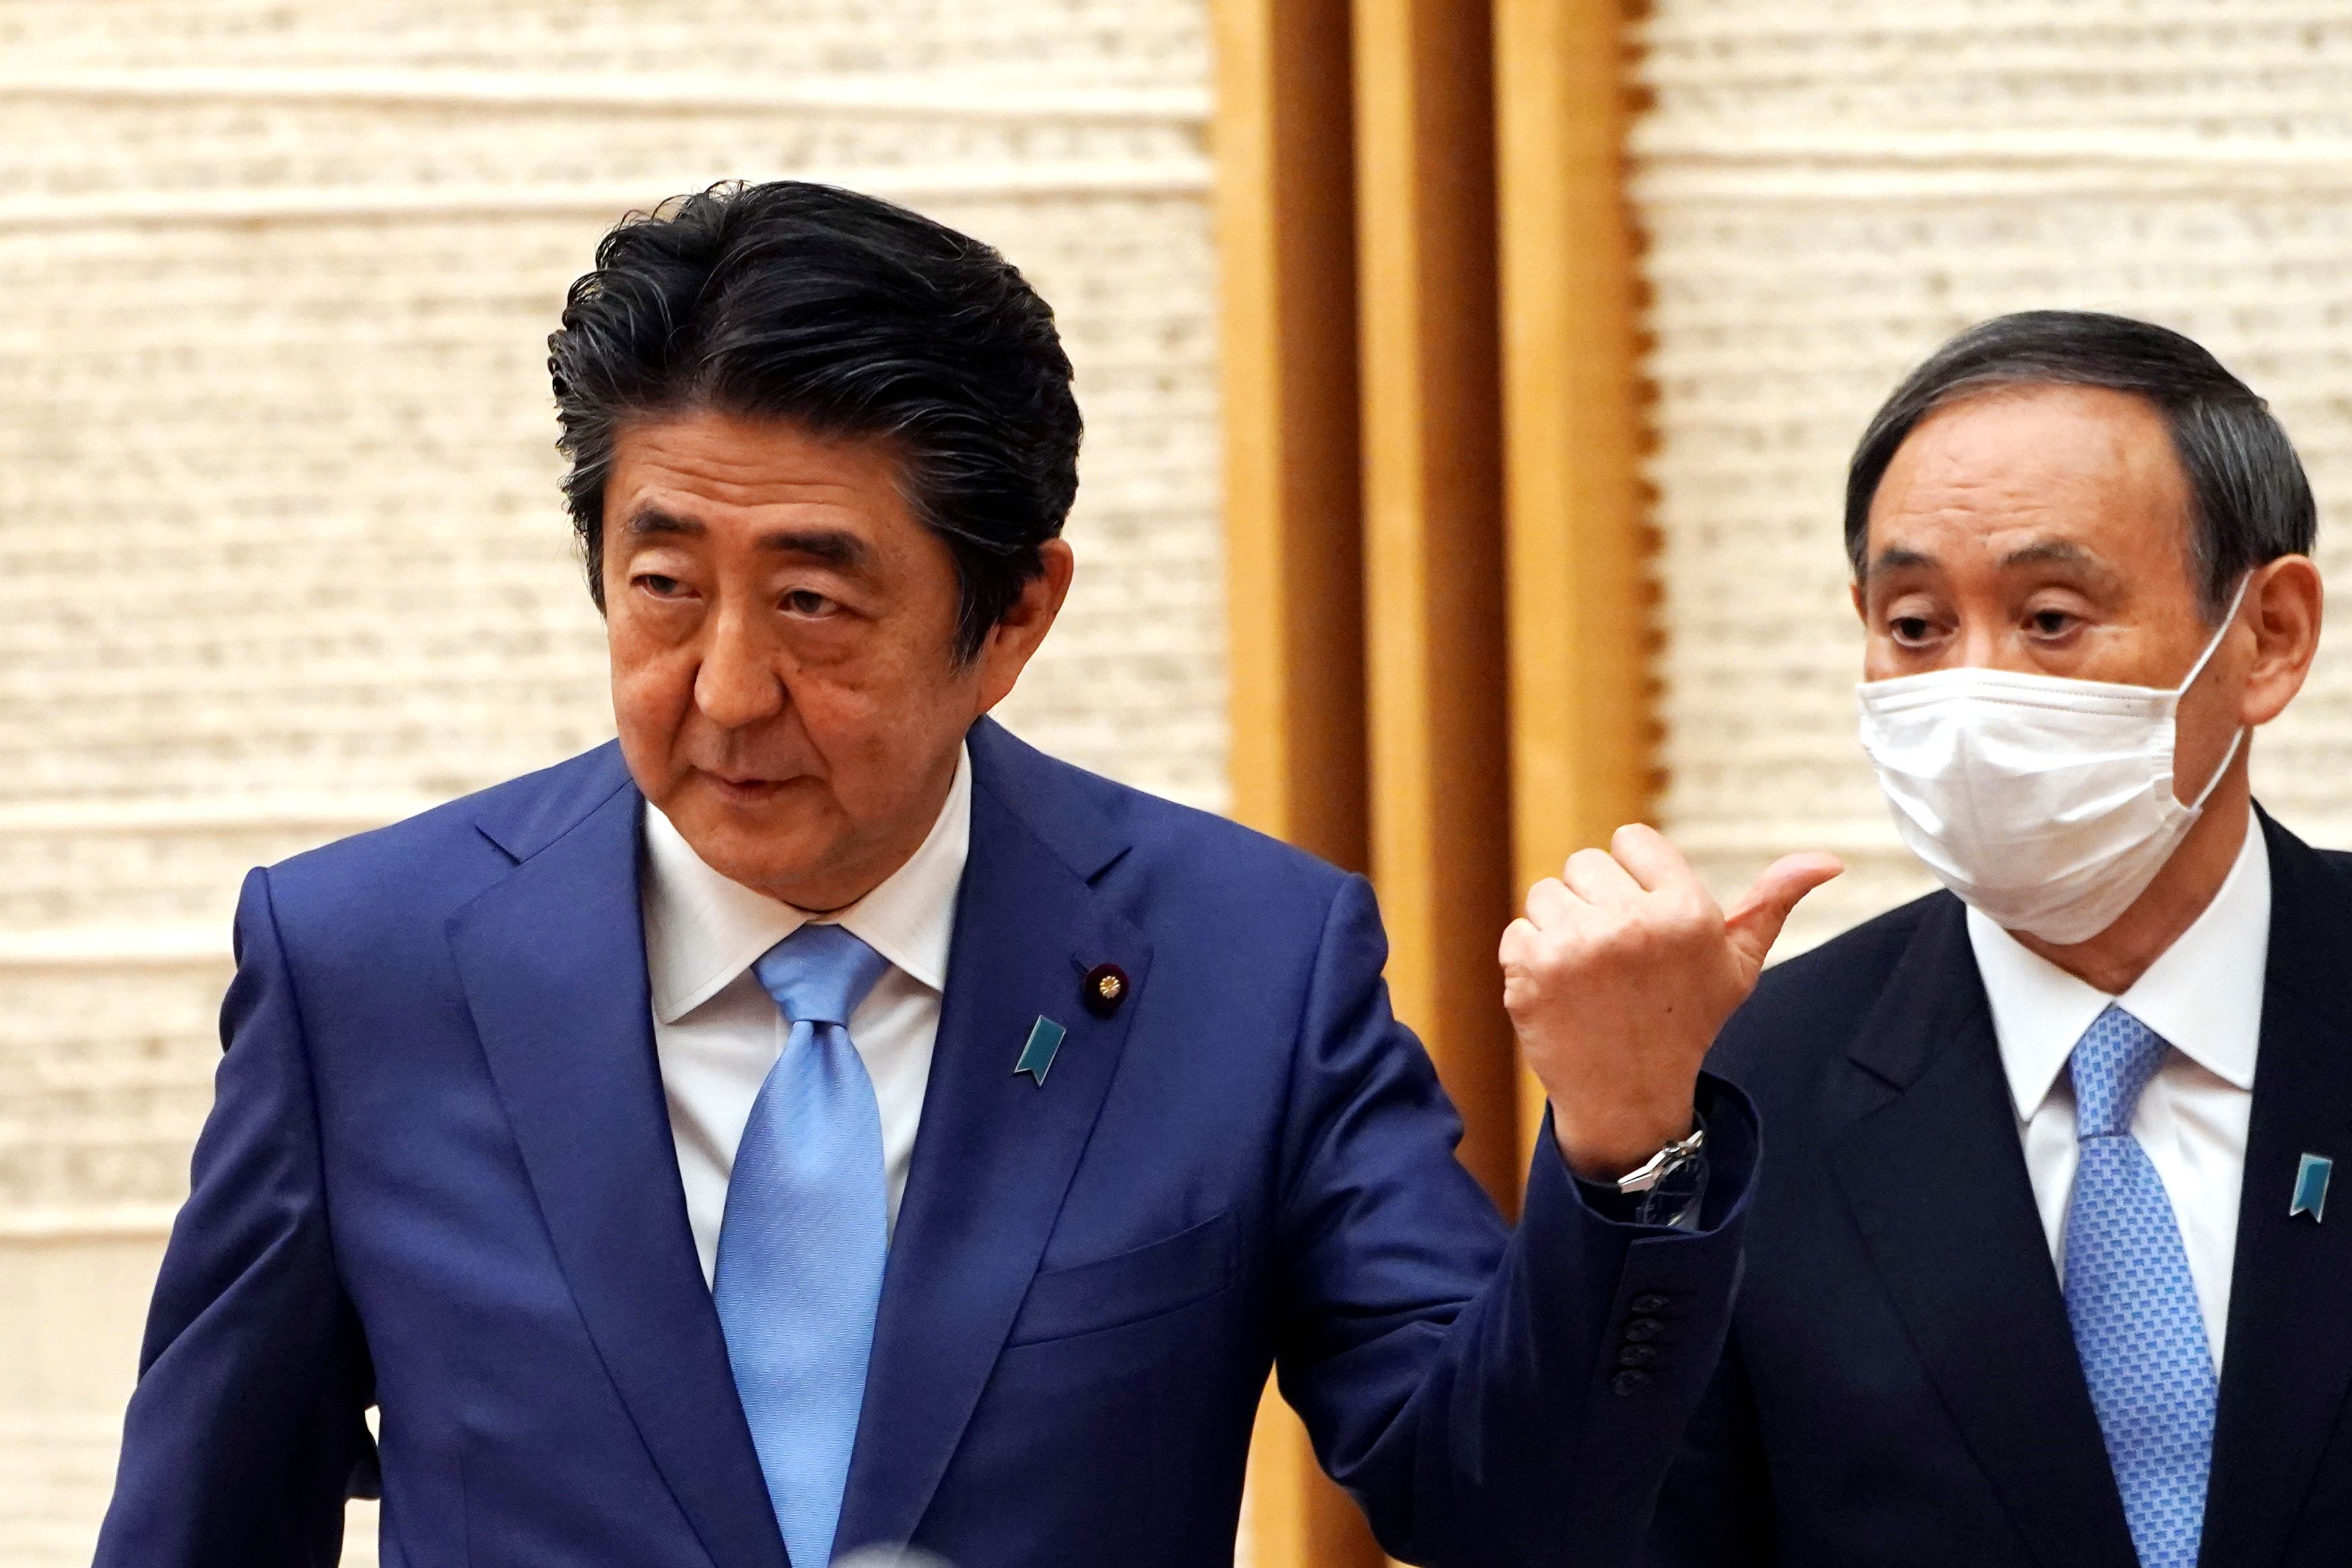 Prime Minister Shinzo Abe and Chief Cabinet Secretary Yoshihide Suga attend a May news conference in Tokyo. Suga, once thought of as a dark horse candidate to succeed Abe, has emerged as the front-runner in the race. | POOL / VIA REUTERS